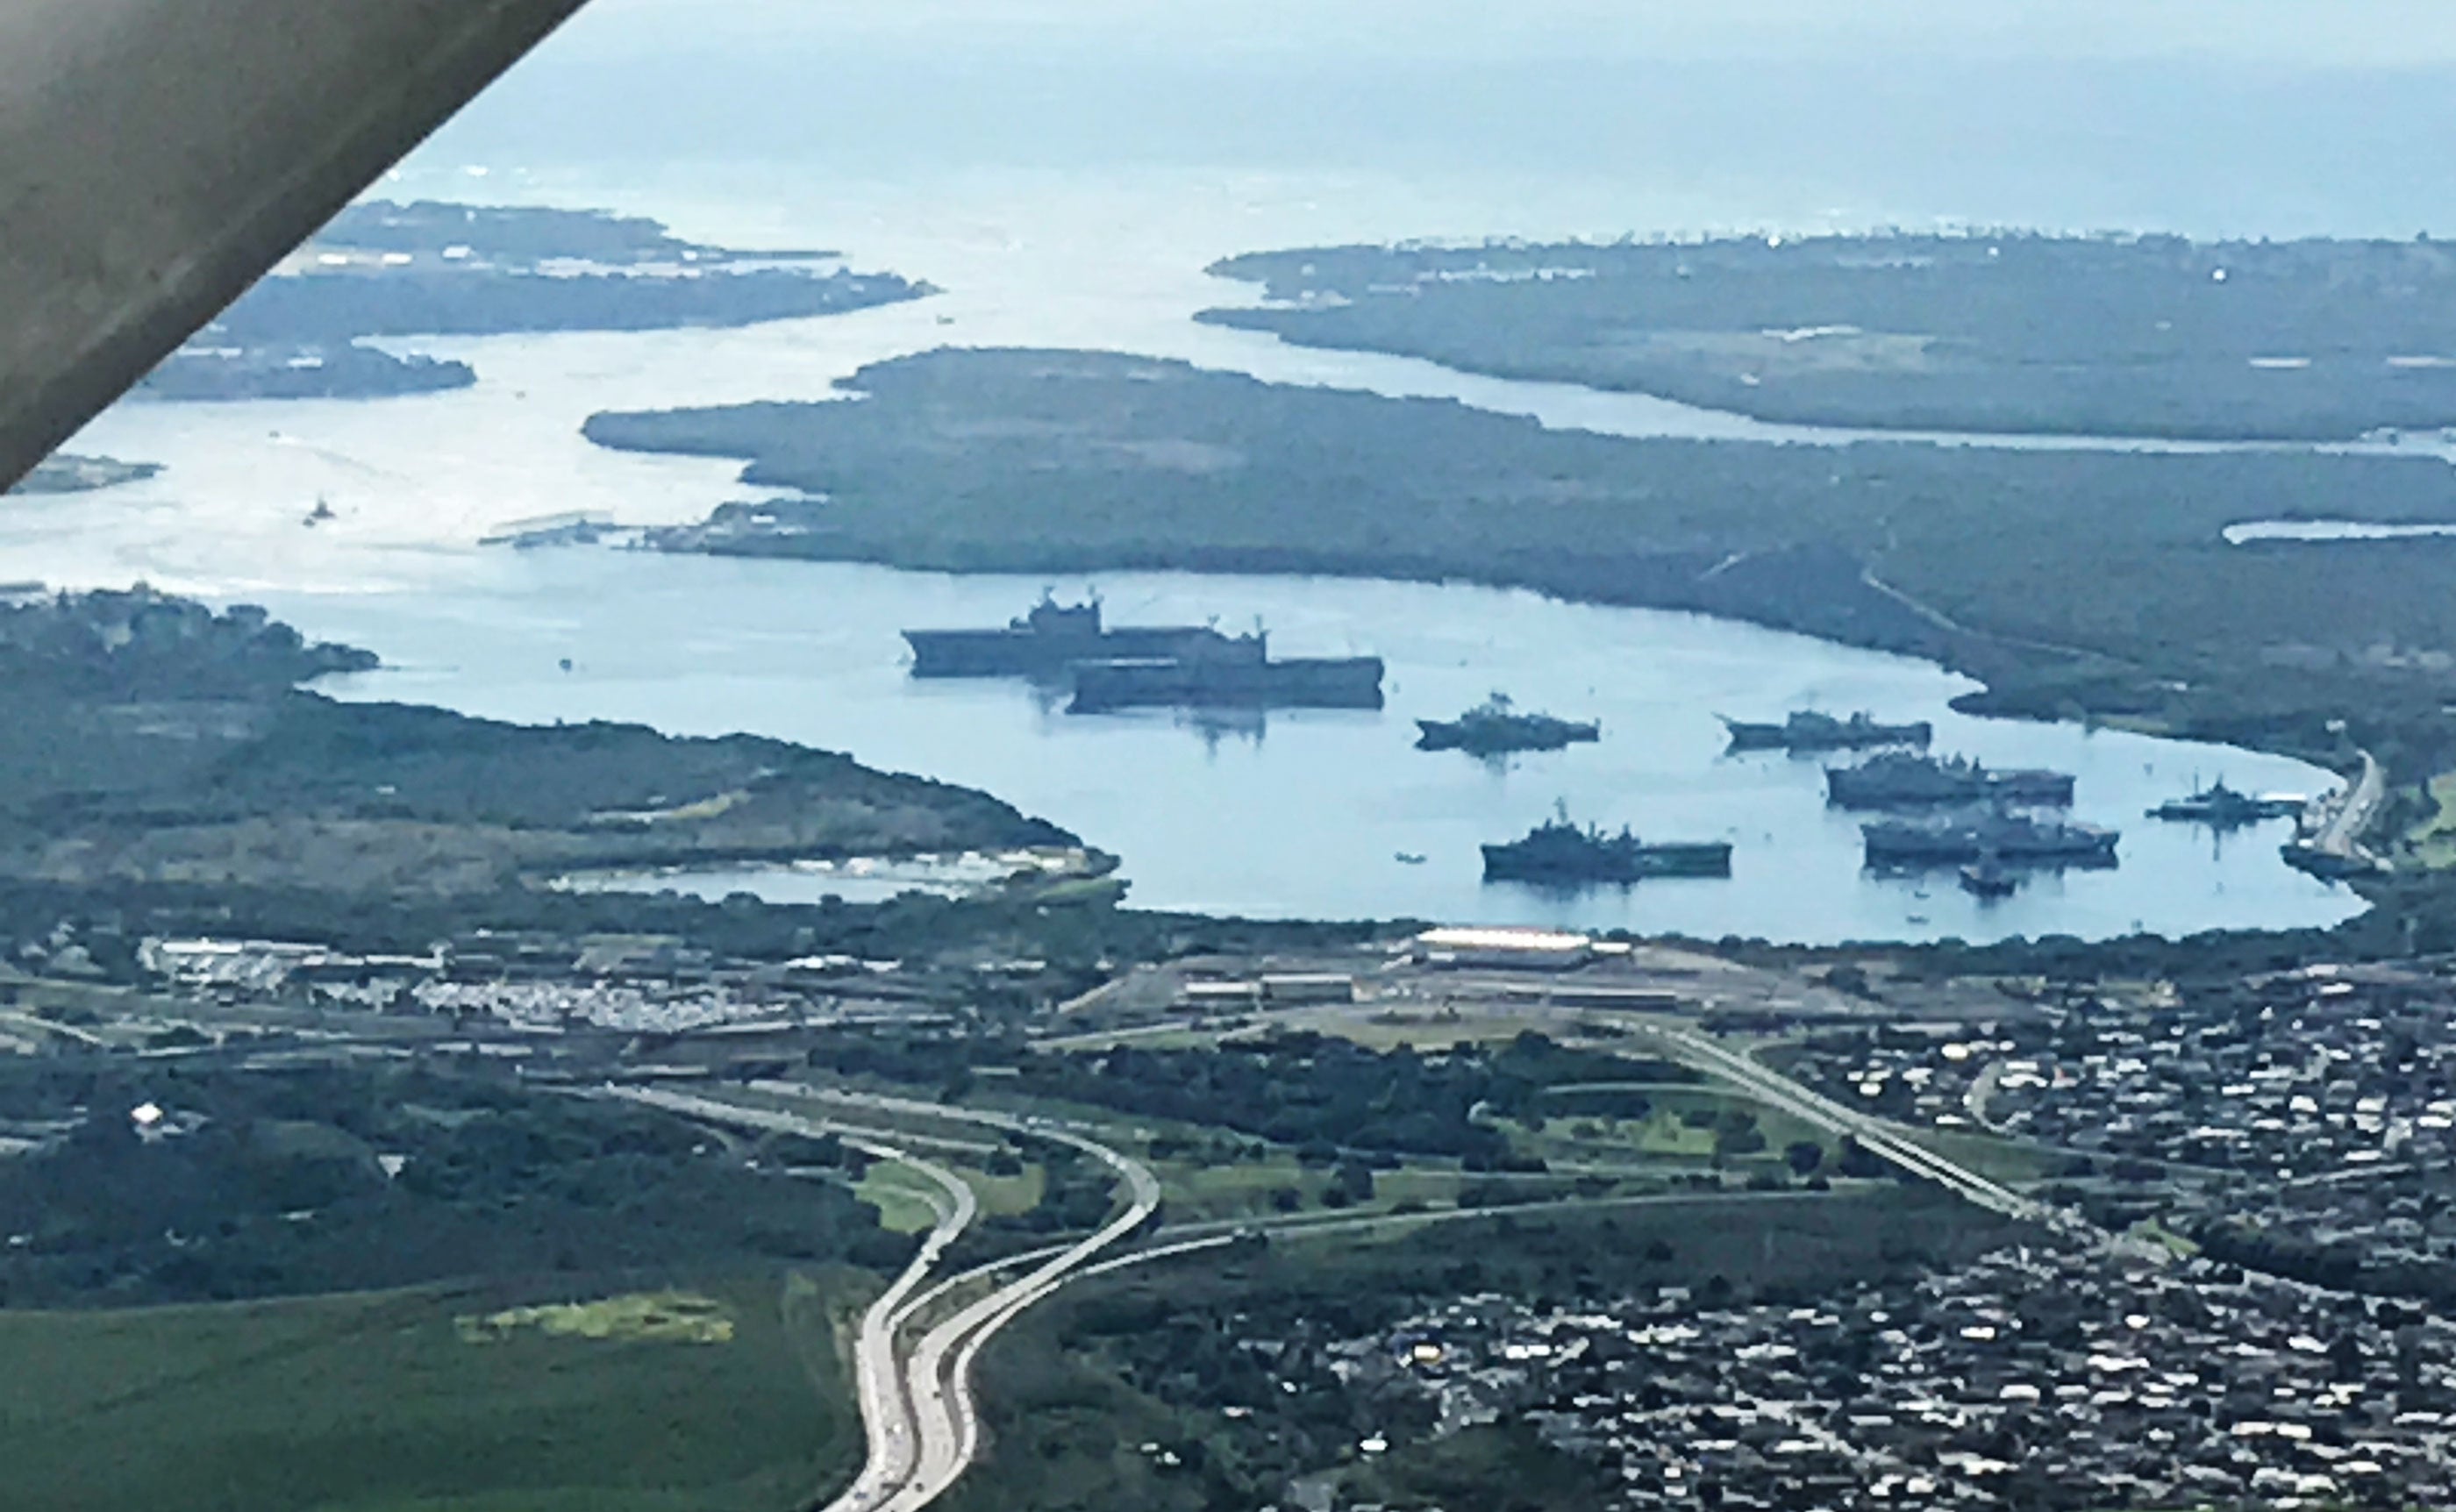 Flying over Pearl Harbor